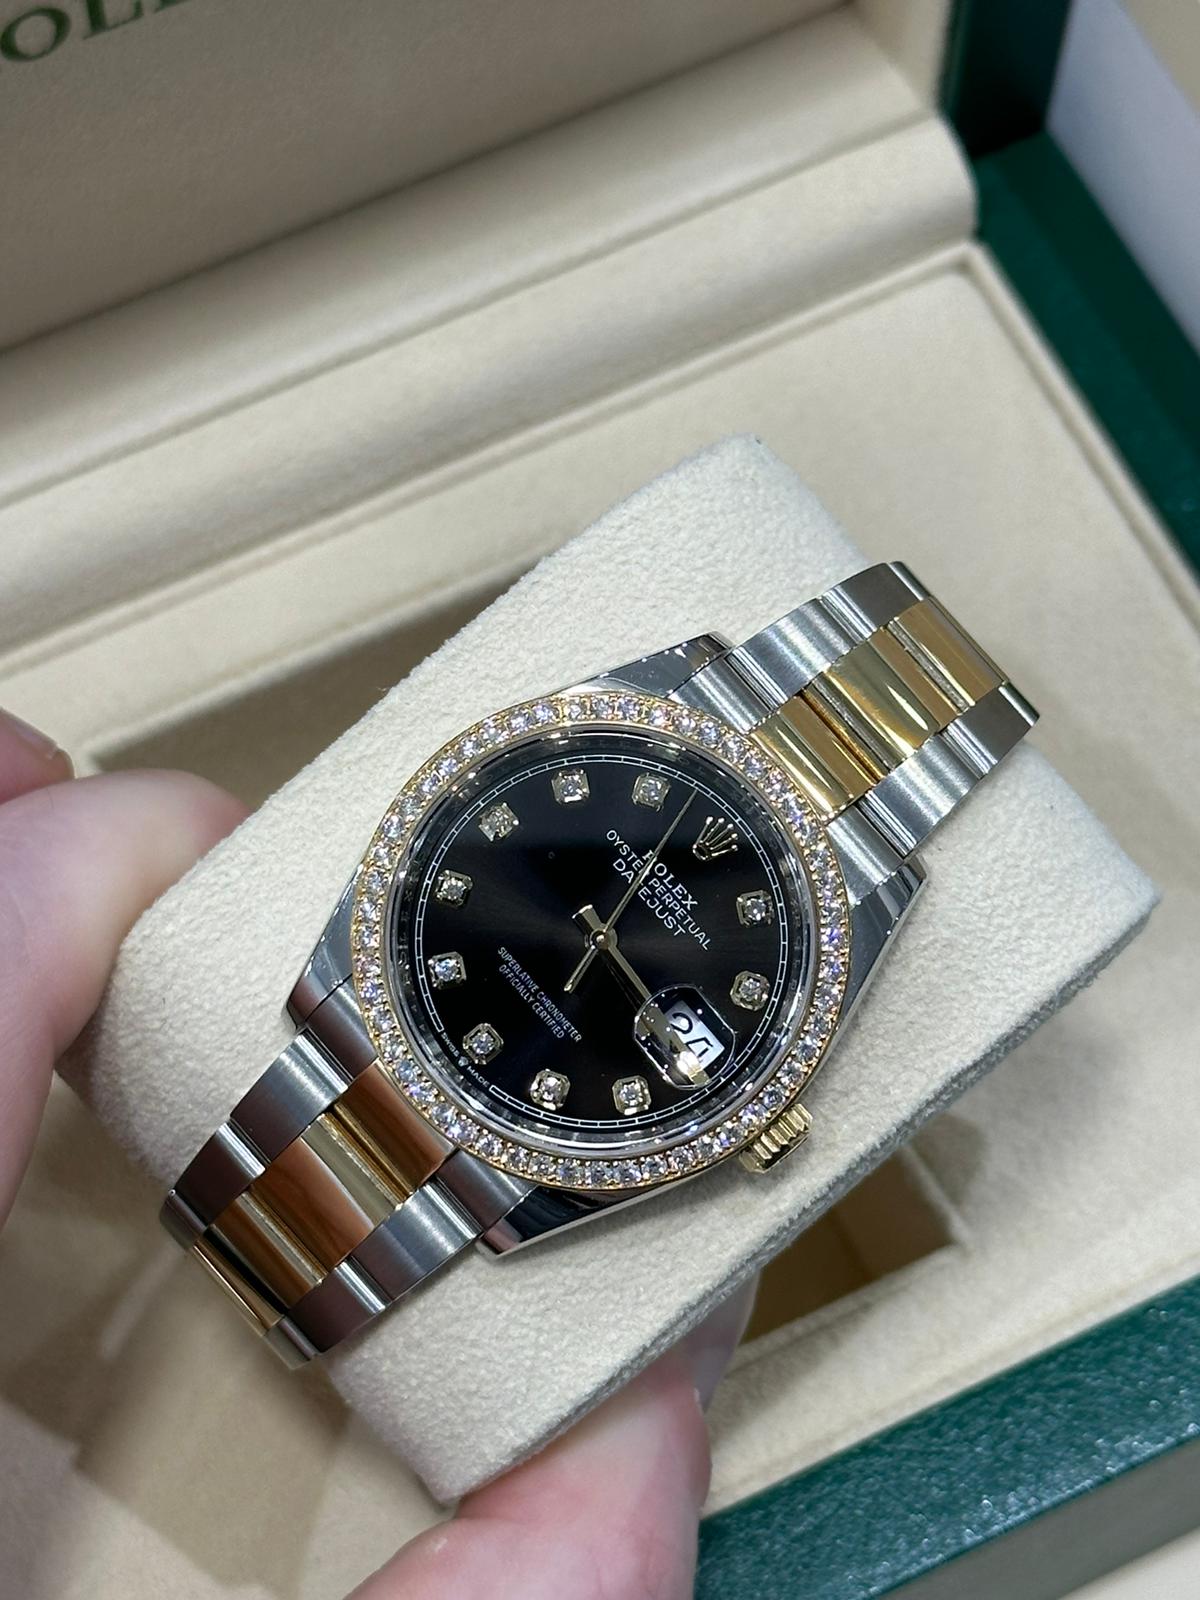 Rolex Datejust 36mm Steel&Yellow Gold with Factory diamond dial&bezel126283RBR 2019 with box/papers